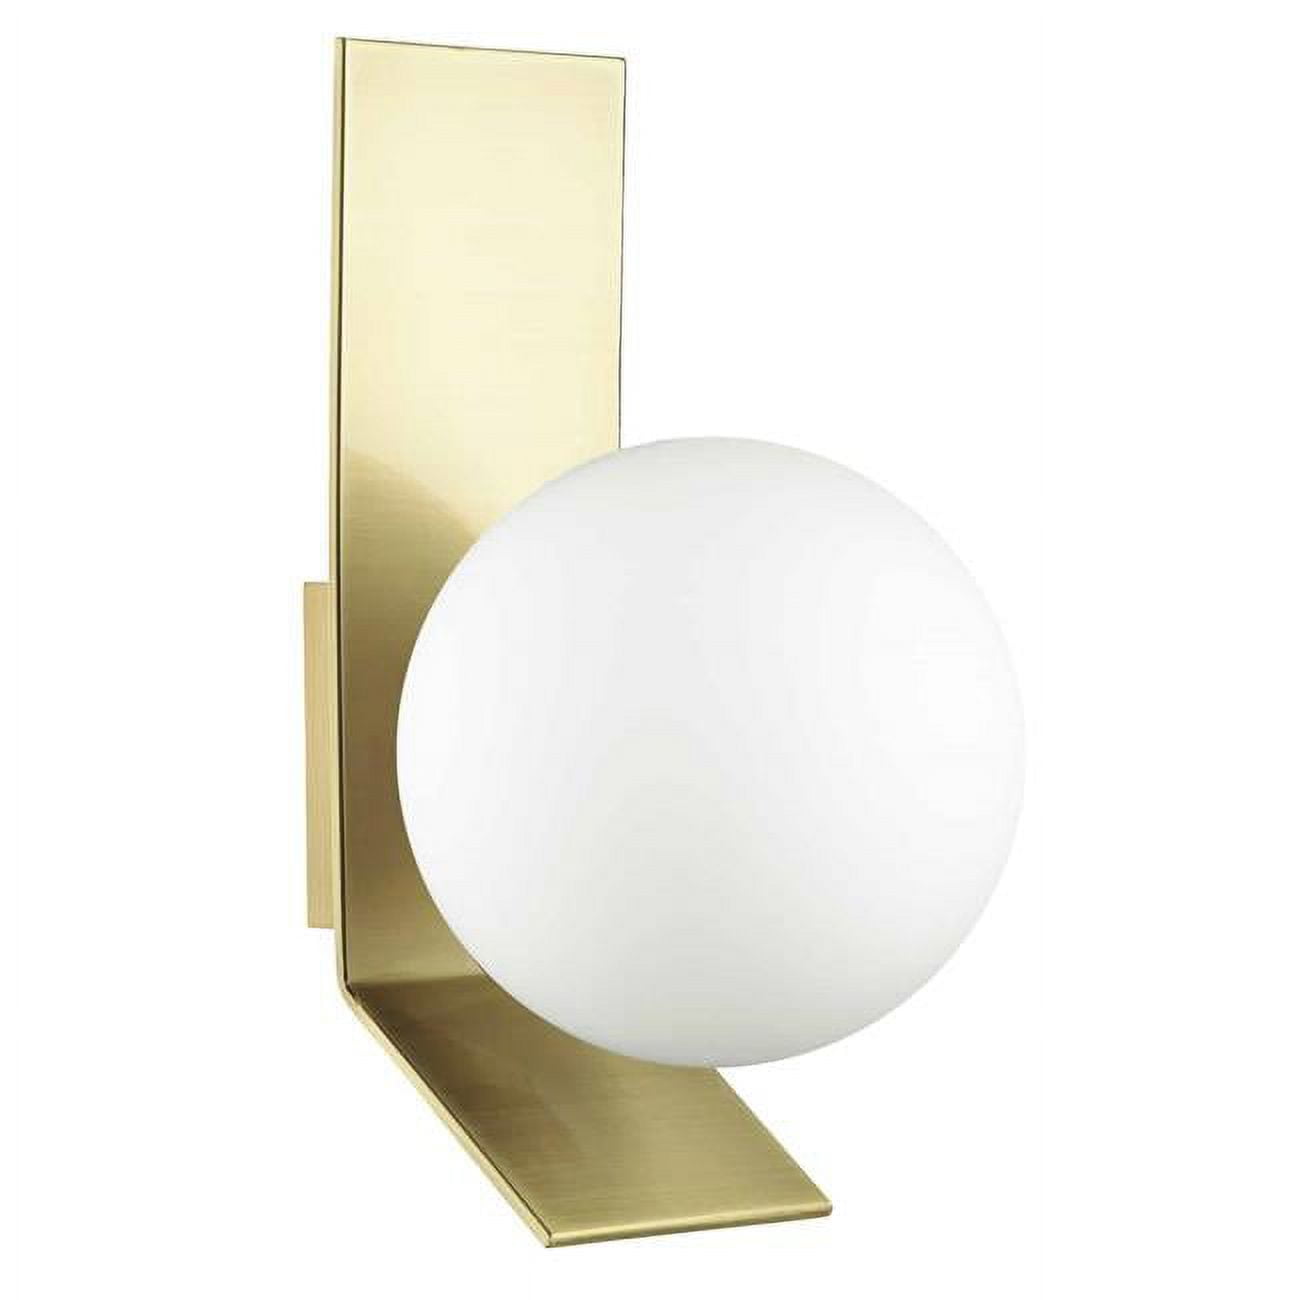 Picture of Dainolite VMT-81W-AGB 1 Light Halogen Wall Sconce, Aged Brass with Opal White Glass